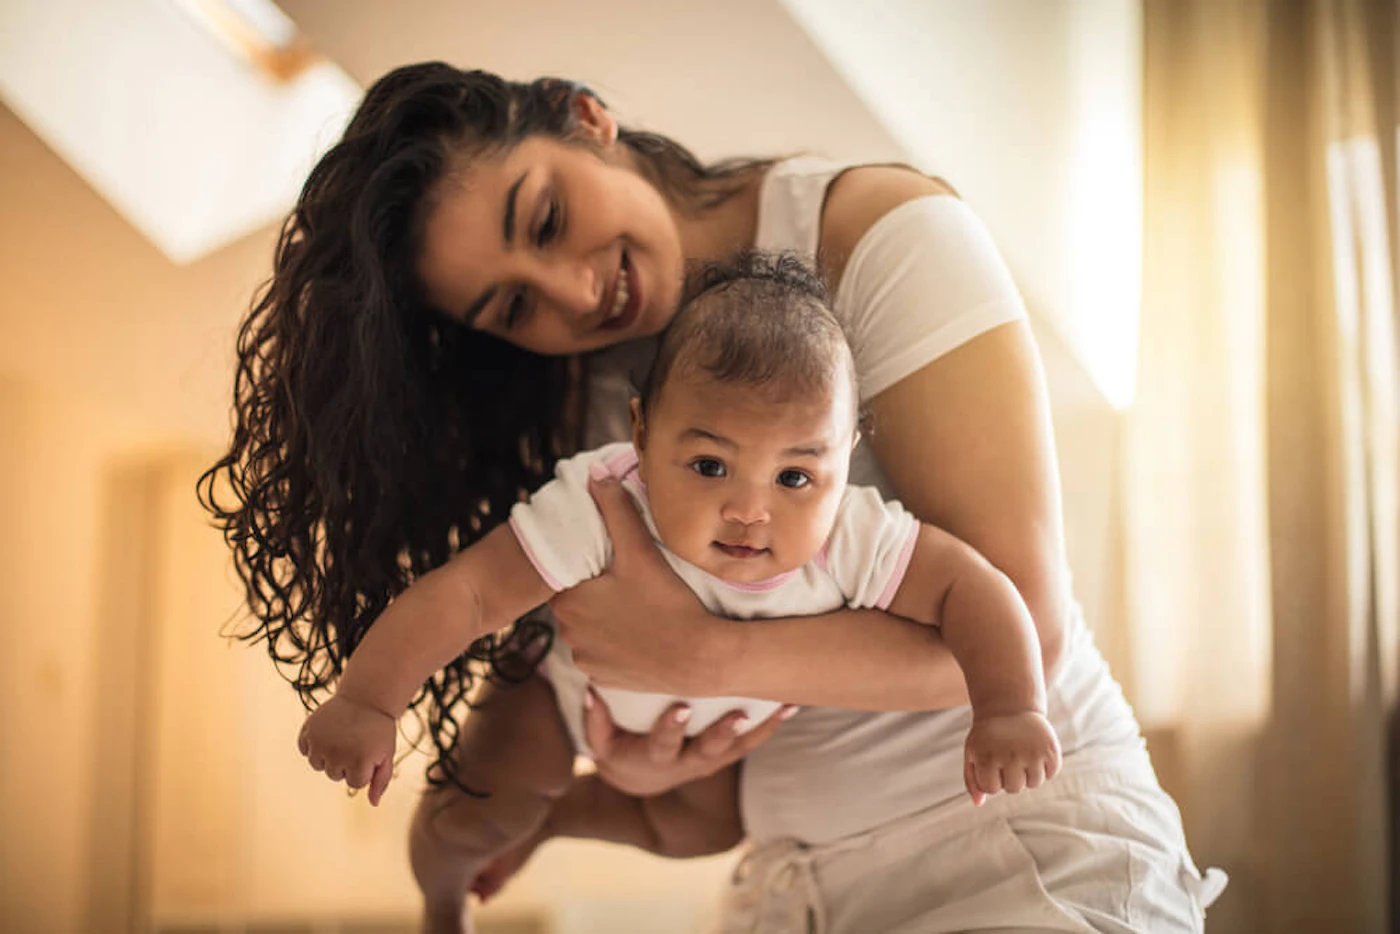 A new study from researchers, including a Duke University team, found some astounding impacts on babies when poor mothers are given cash aid. (Shutterstock)